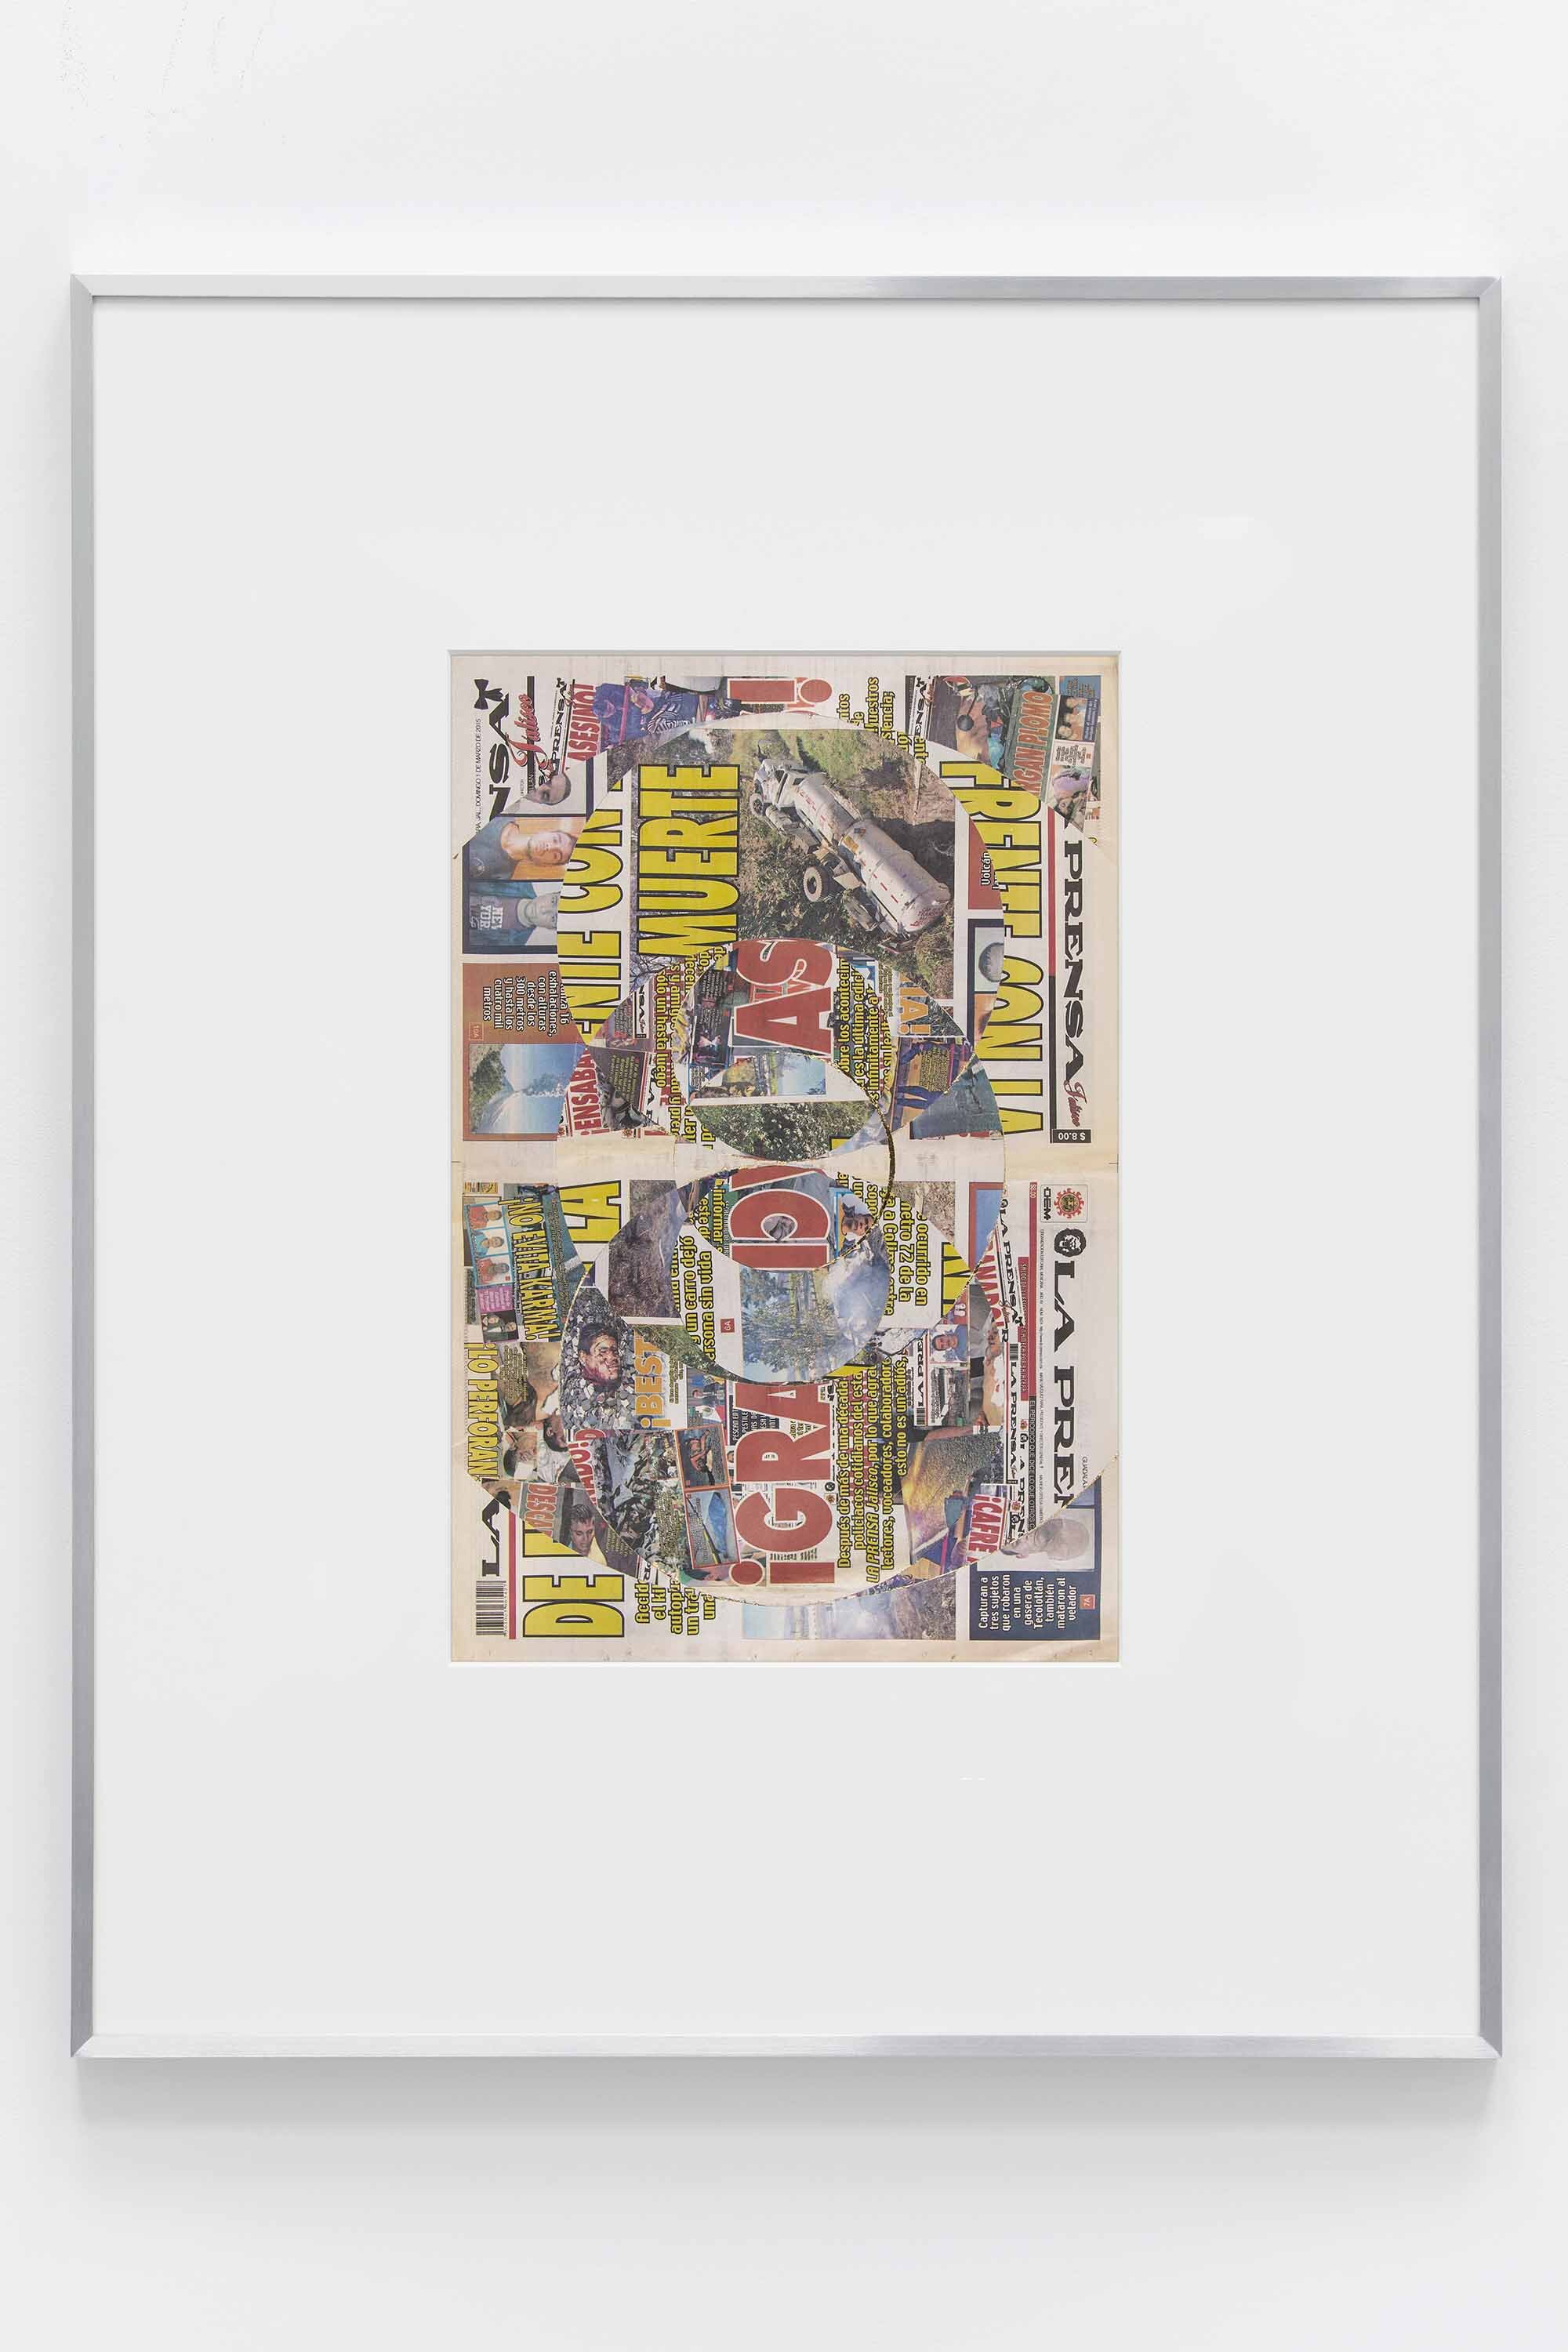   Blind Collage (Seven 180º Rotations, La Prensa Jalisco: Guadalajara, Mexico, Sunday, March 1, 2015)   2021  Newspaper, tape, and 22 karat gold leaf  39 1/8 x 31 1/4 inches   Blind Collages, 2017–   Exhibition:   Foreign Correspondence, 2021  